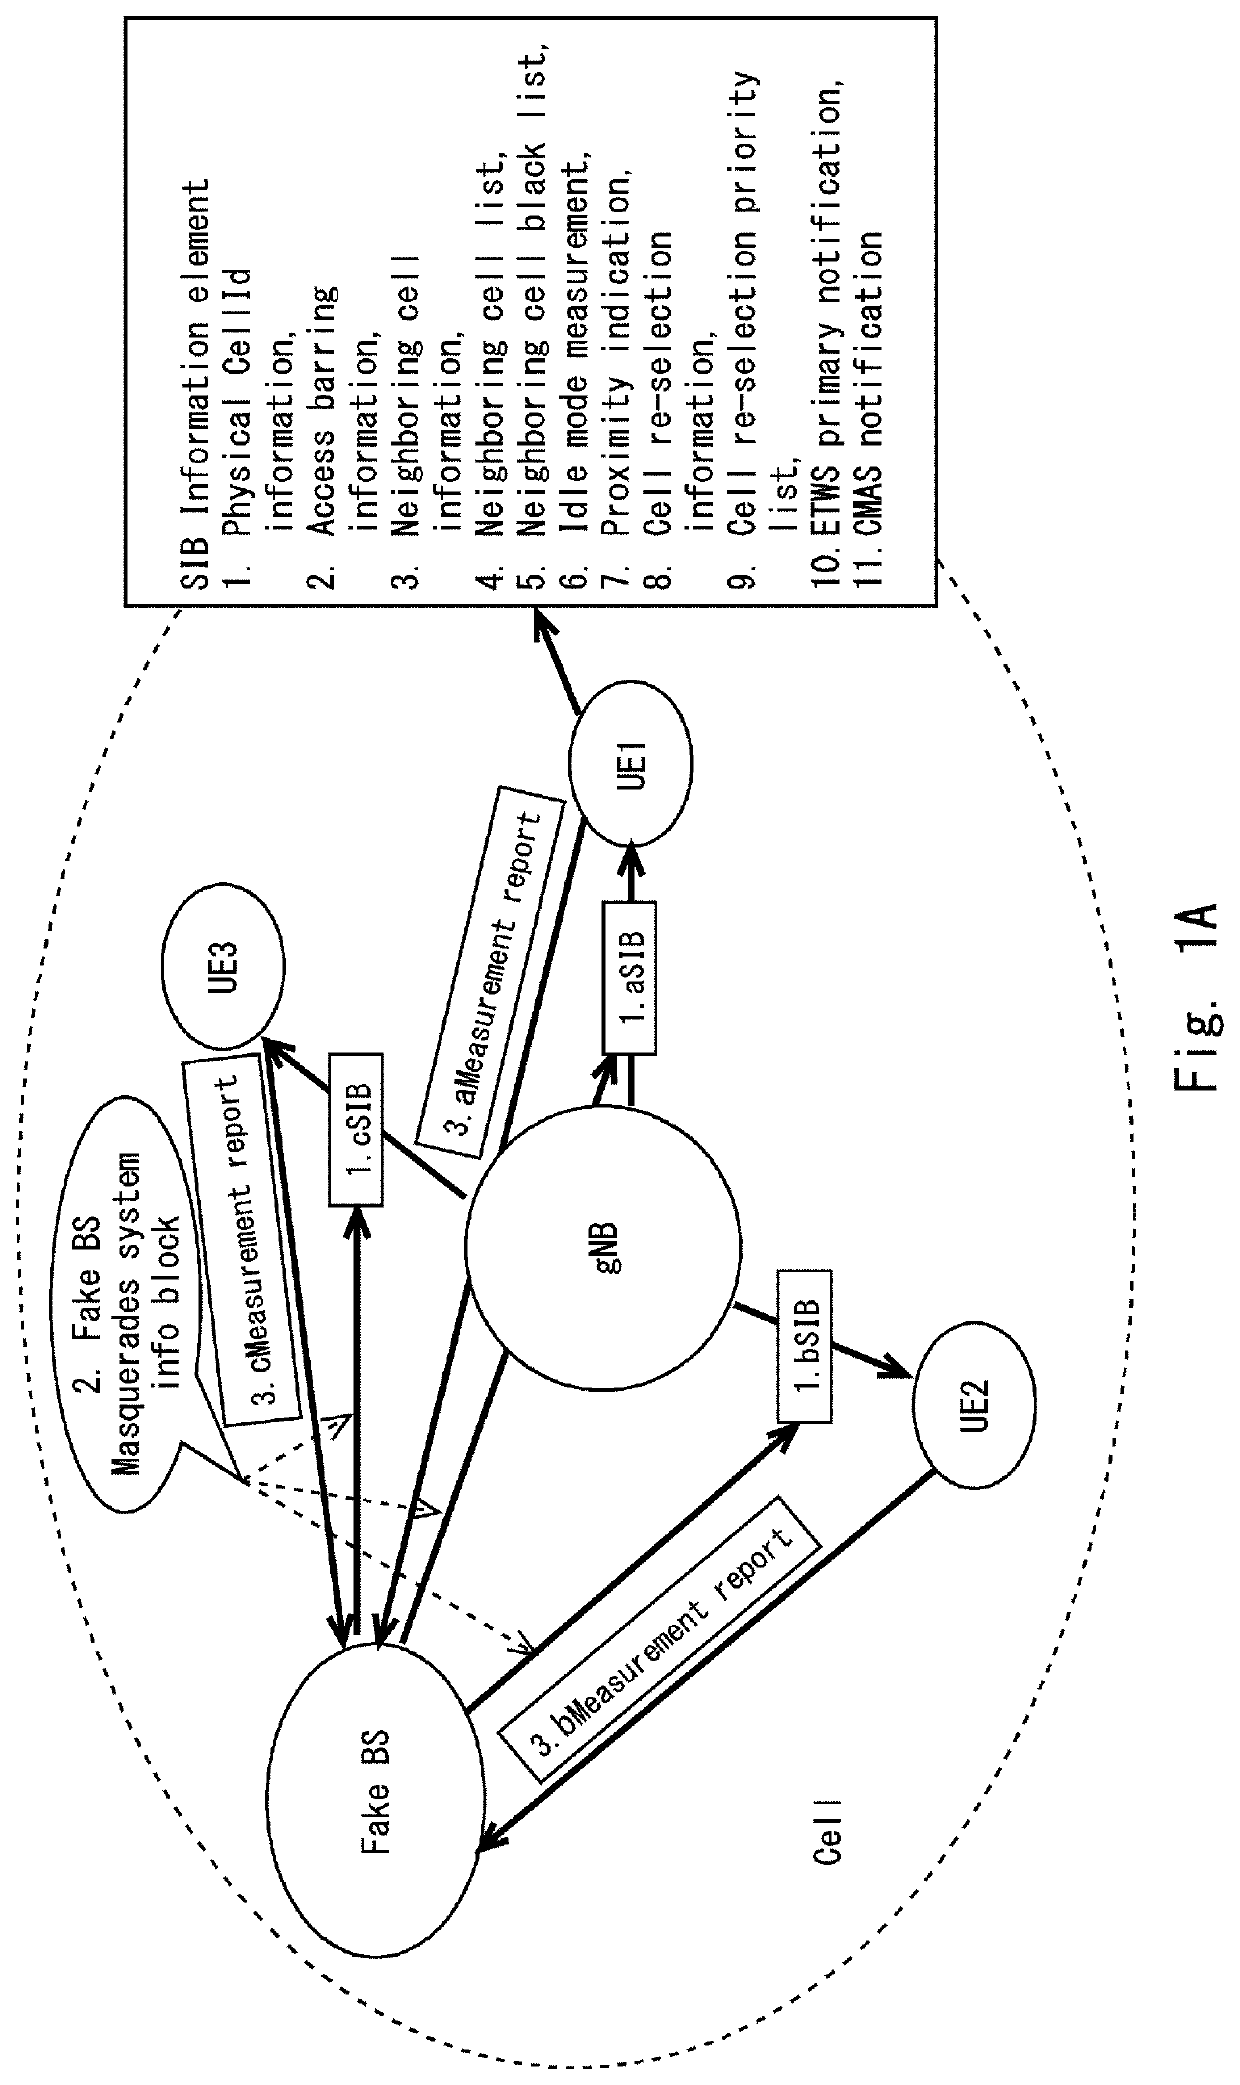 Source base station, ue, method in wireless communication system